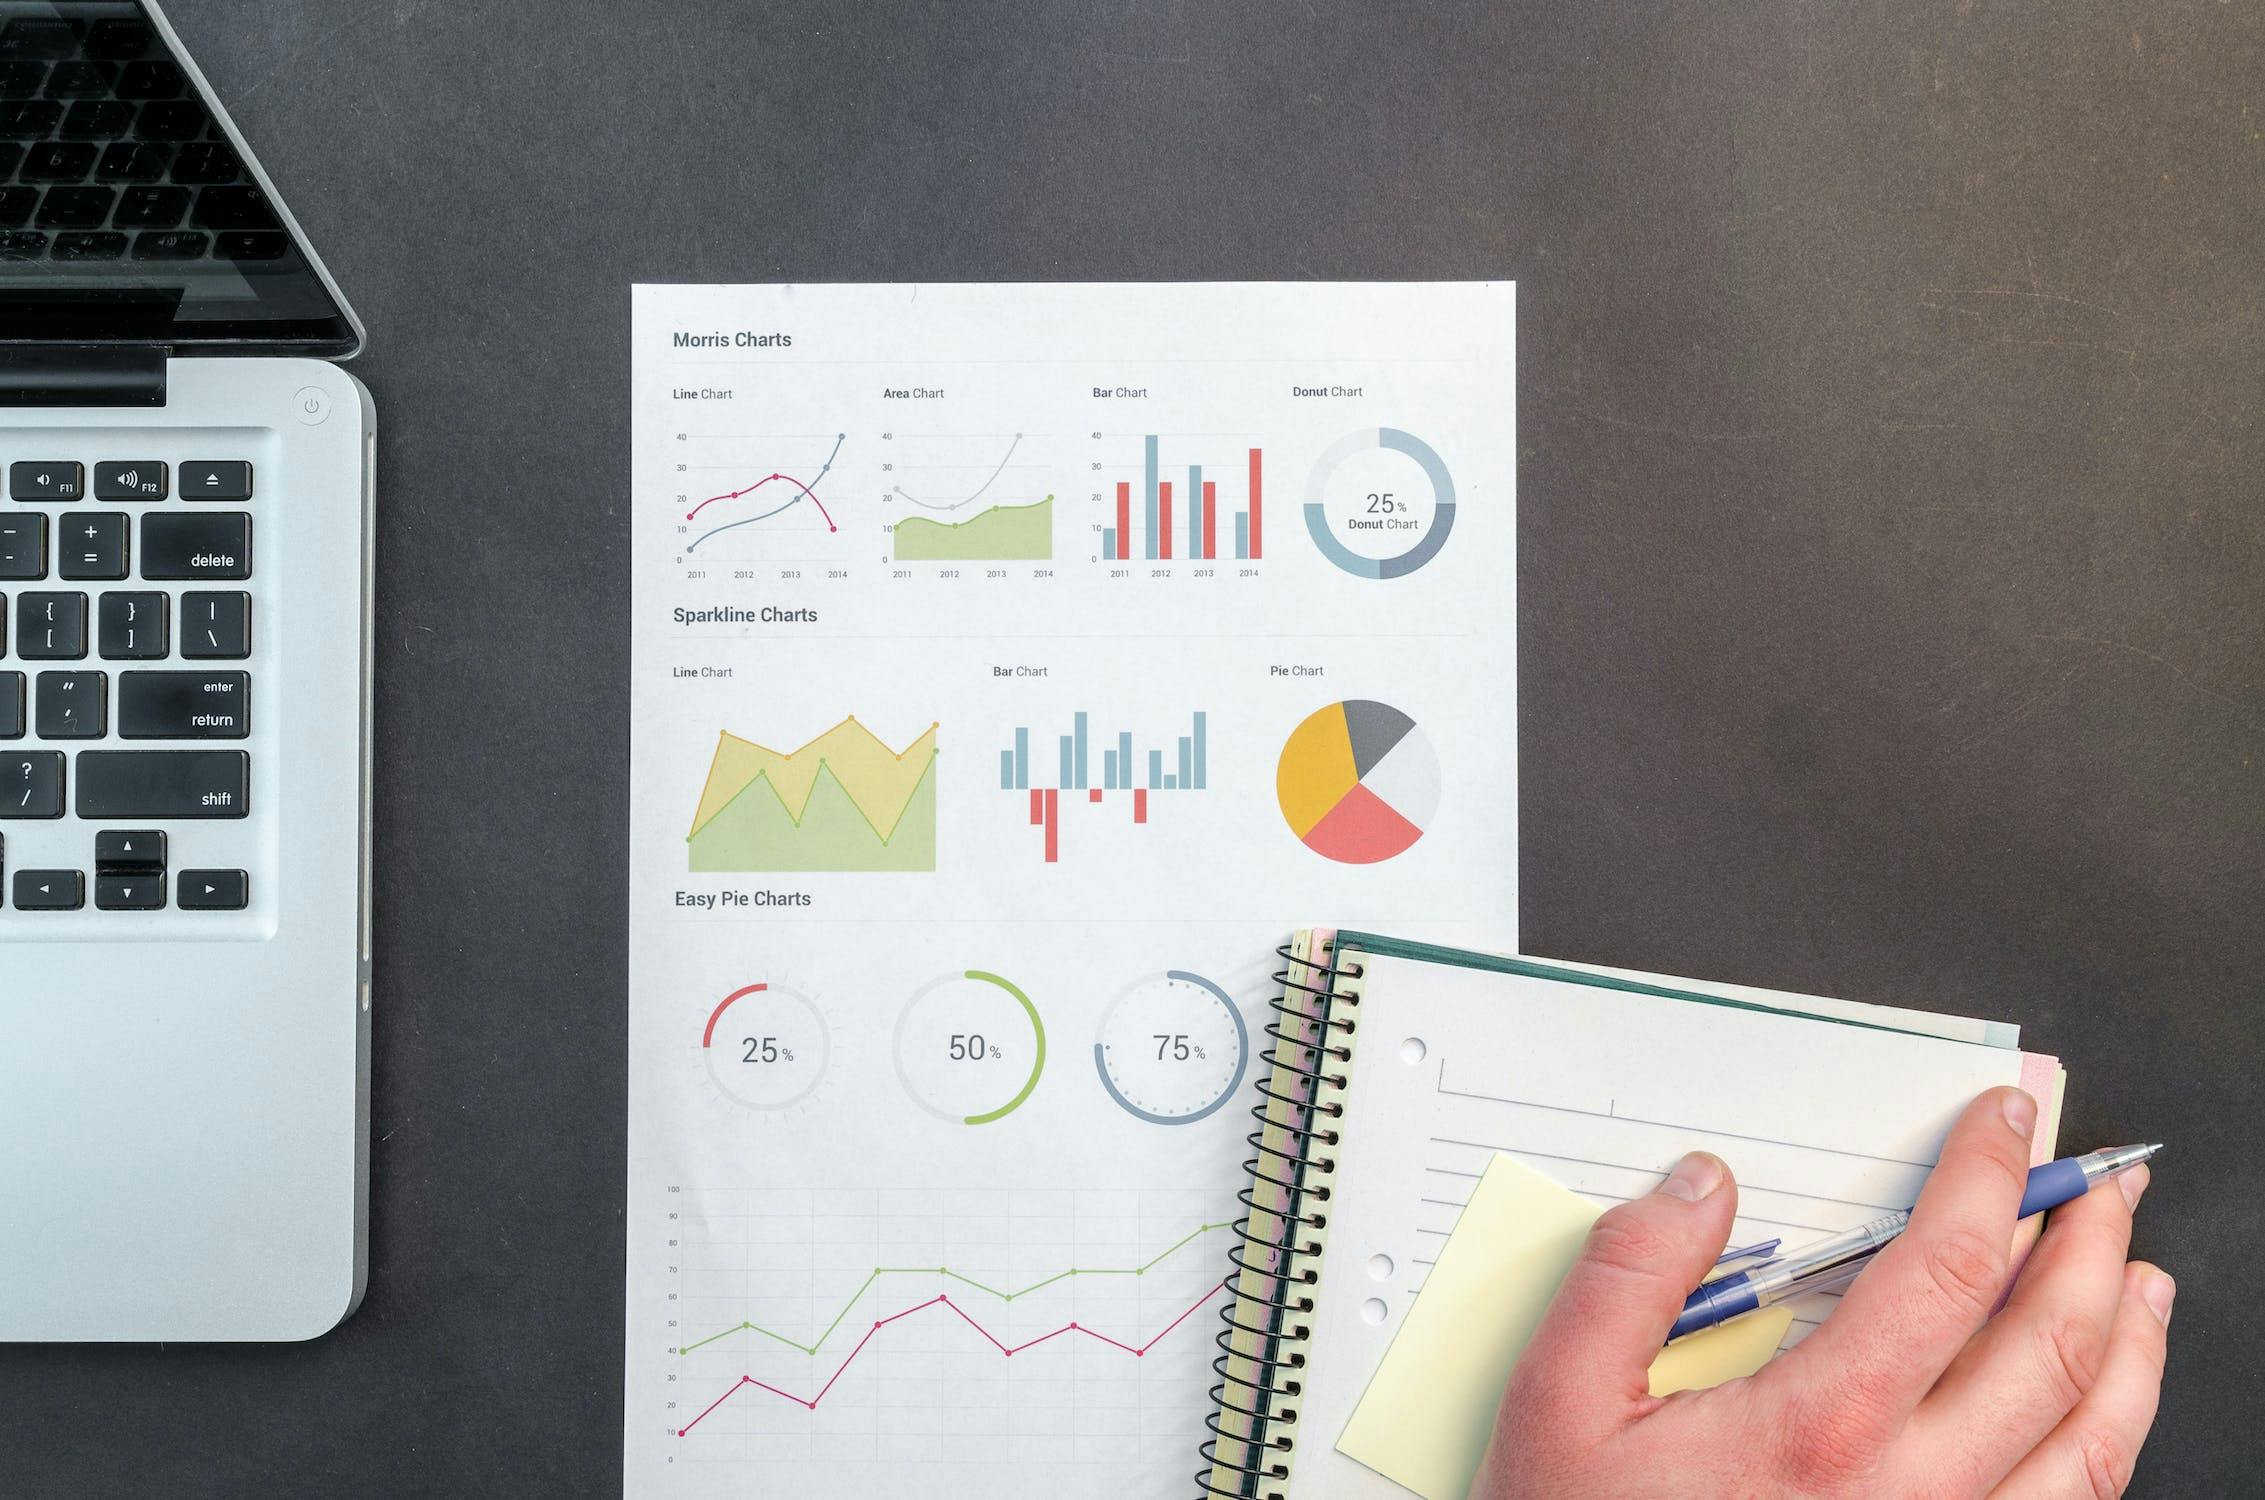 5 recommended data analytics tools for your business